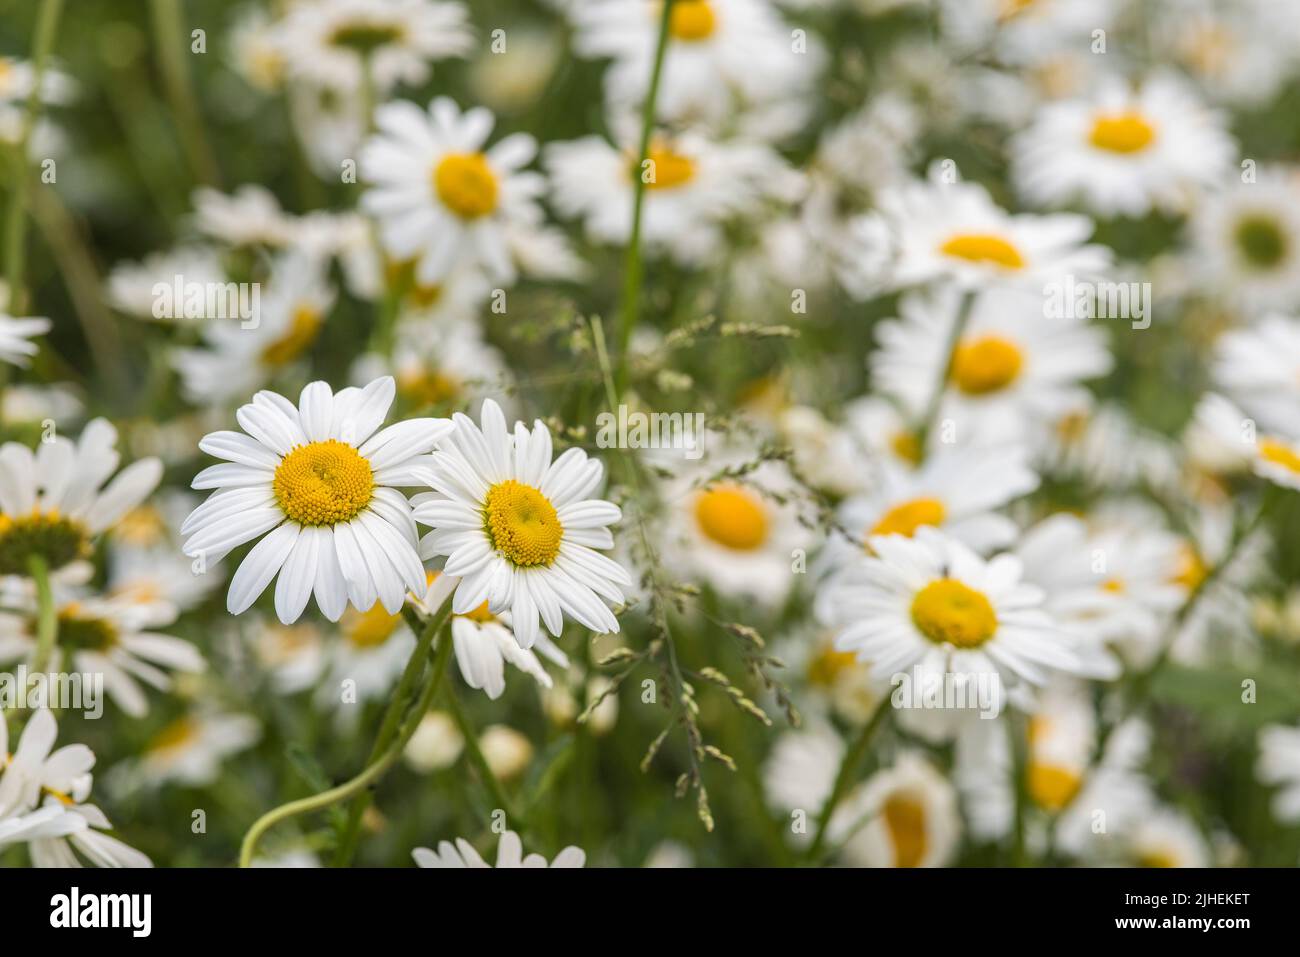 Olearia X Scilloniensis or Daisy Bush growing in a wildflower meadow beside the urban beehives in the background. Stock Photo